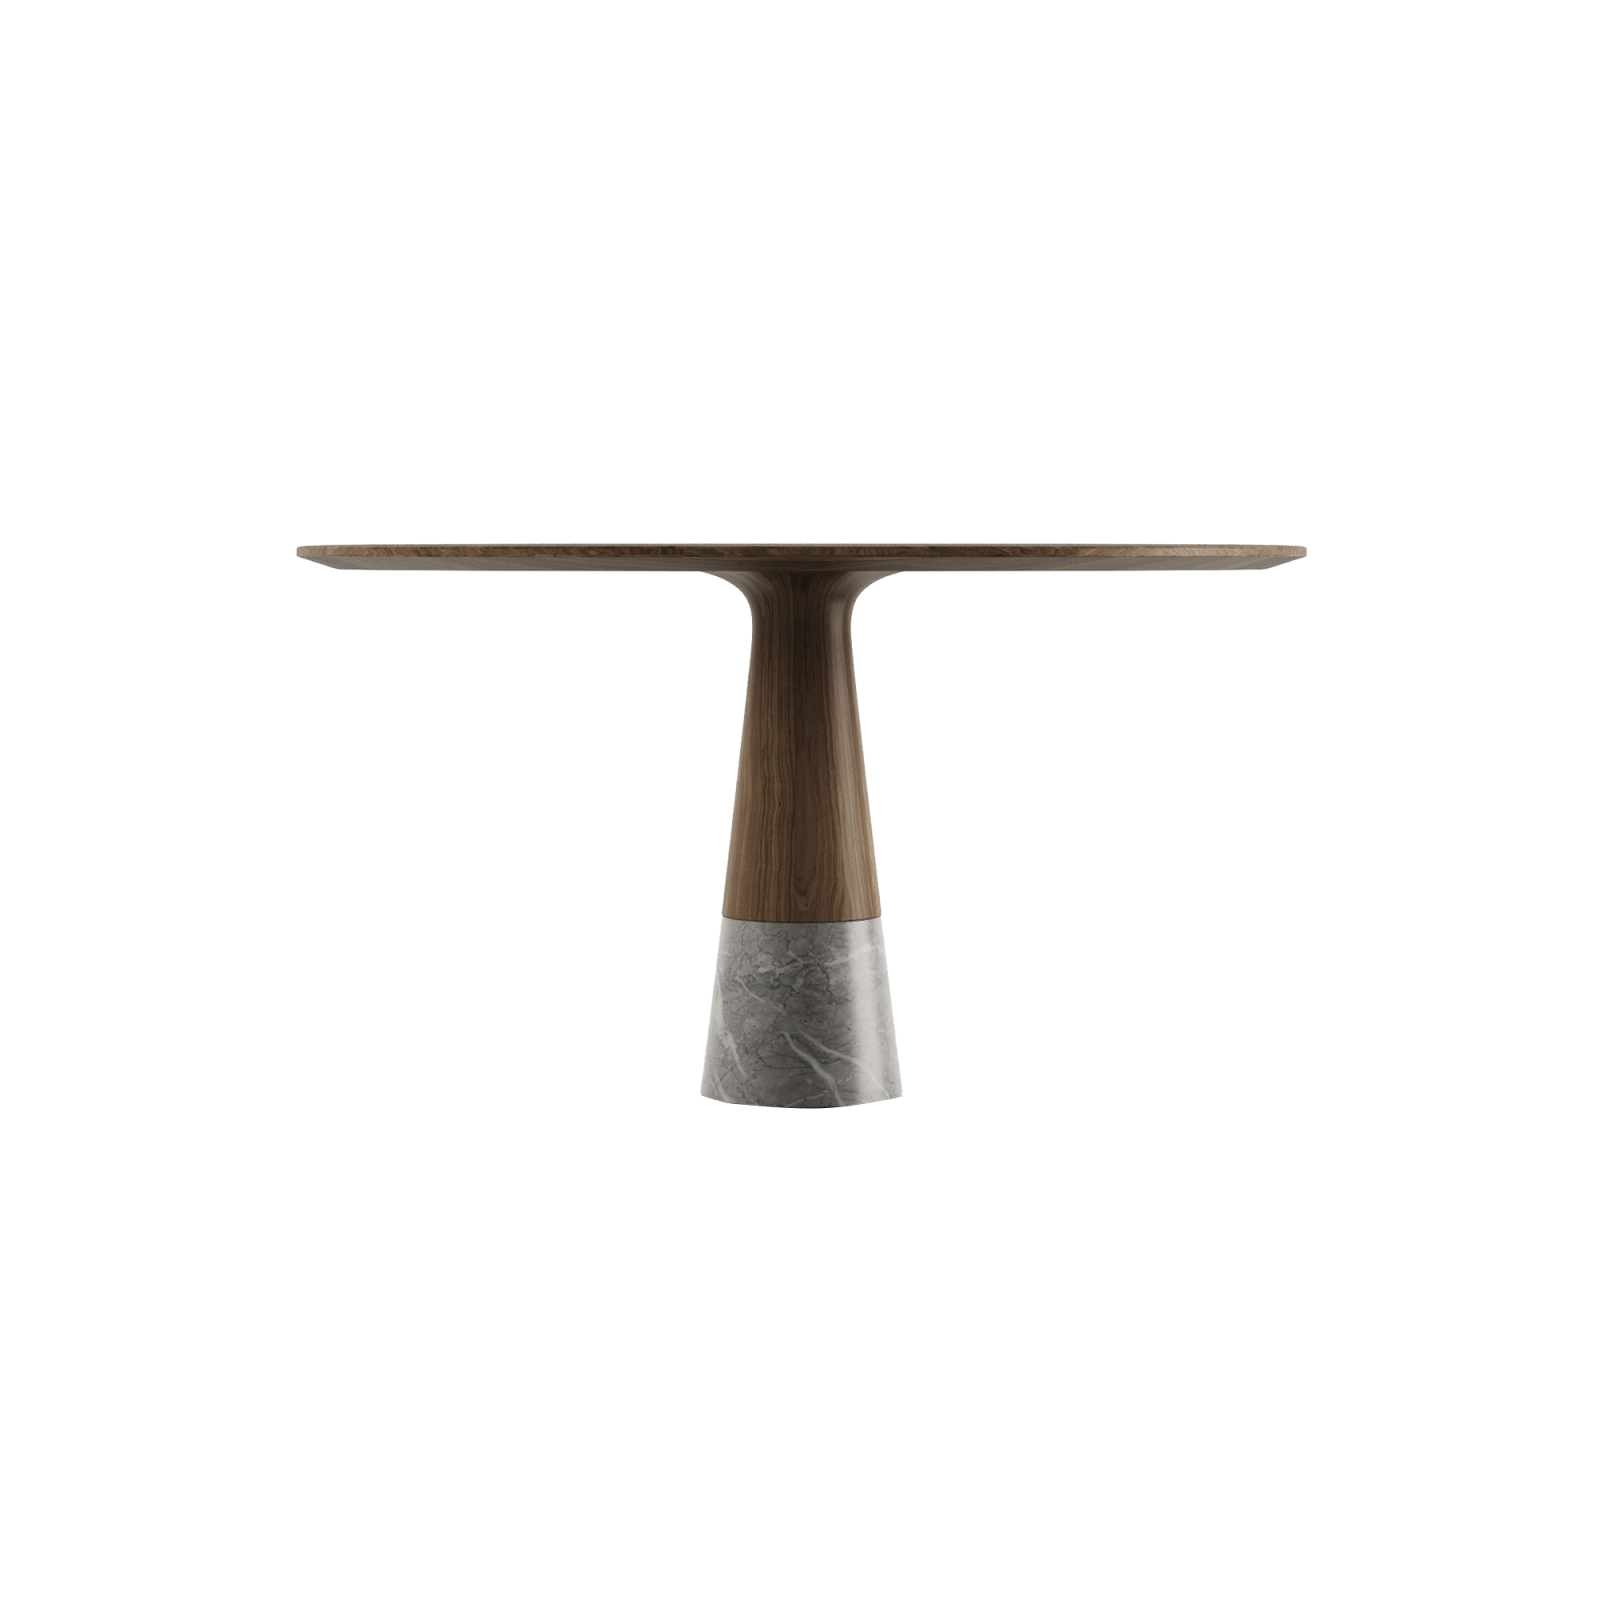 Echo table, the perfect transition from a solid foot, that tapers gracefully from bottom to top, to a delicate wooden top.